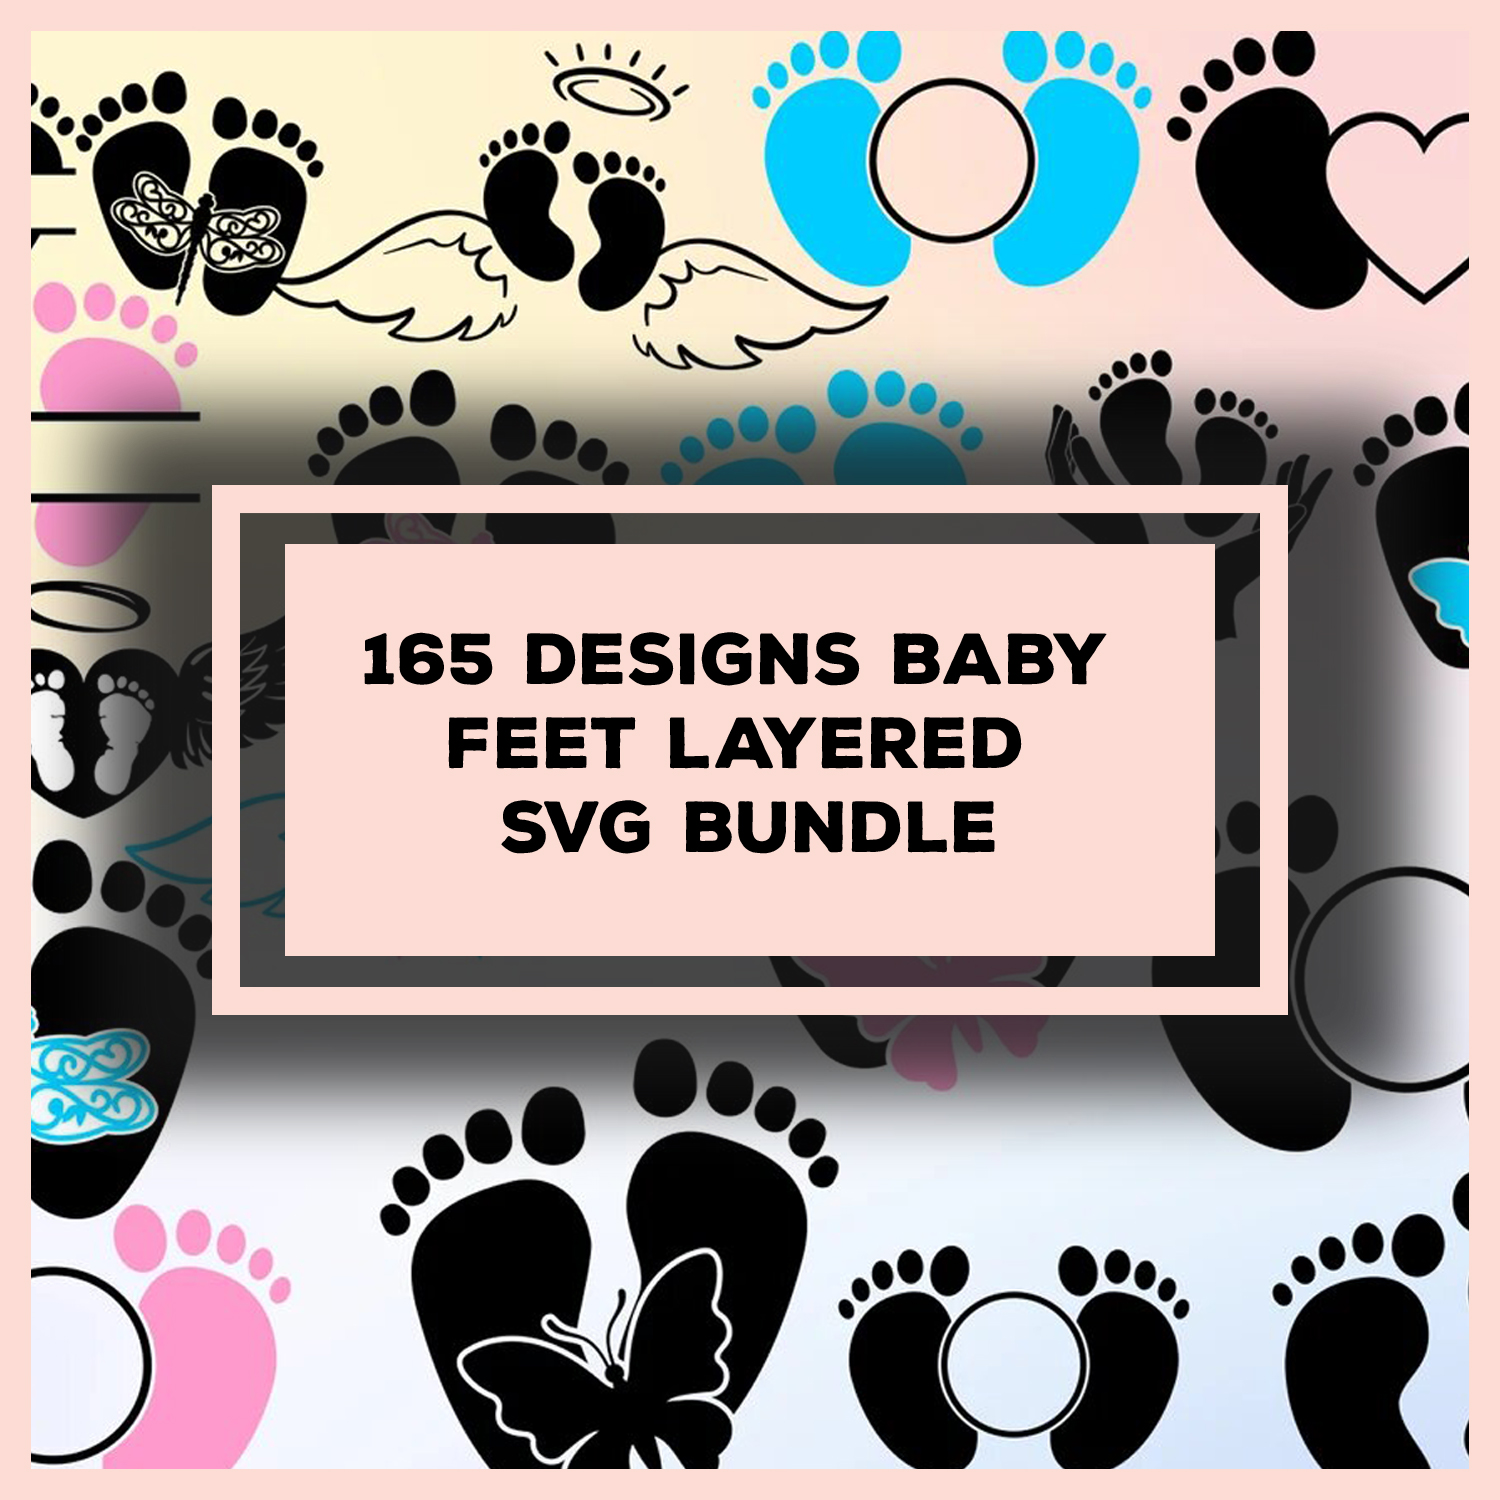 Prints of baby feet layered.